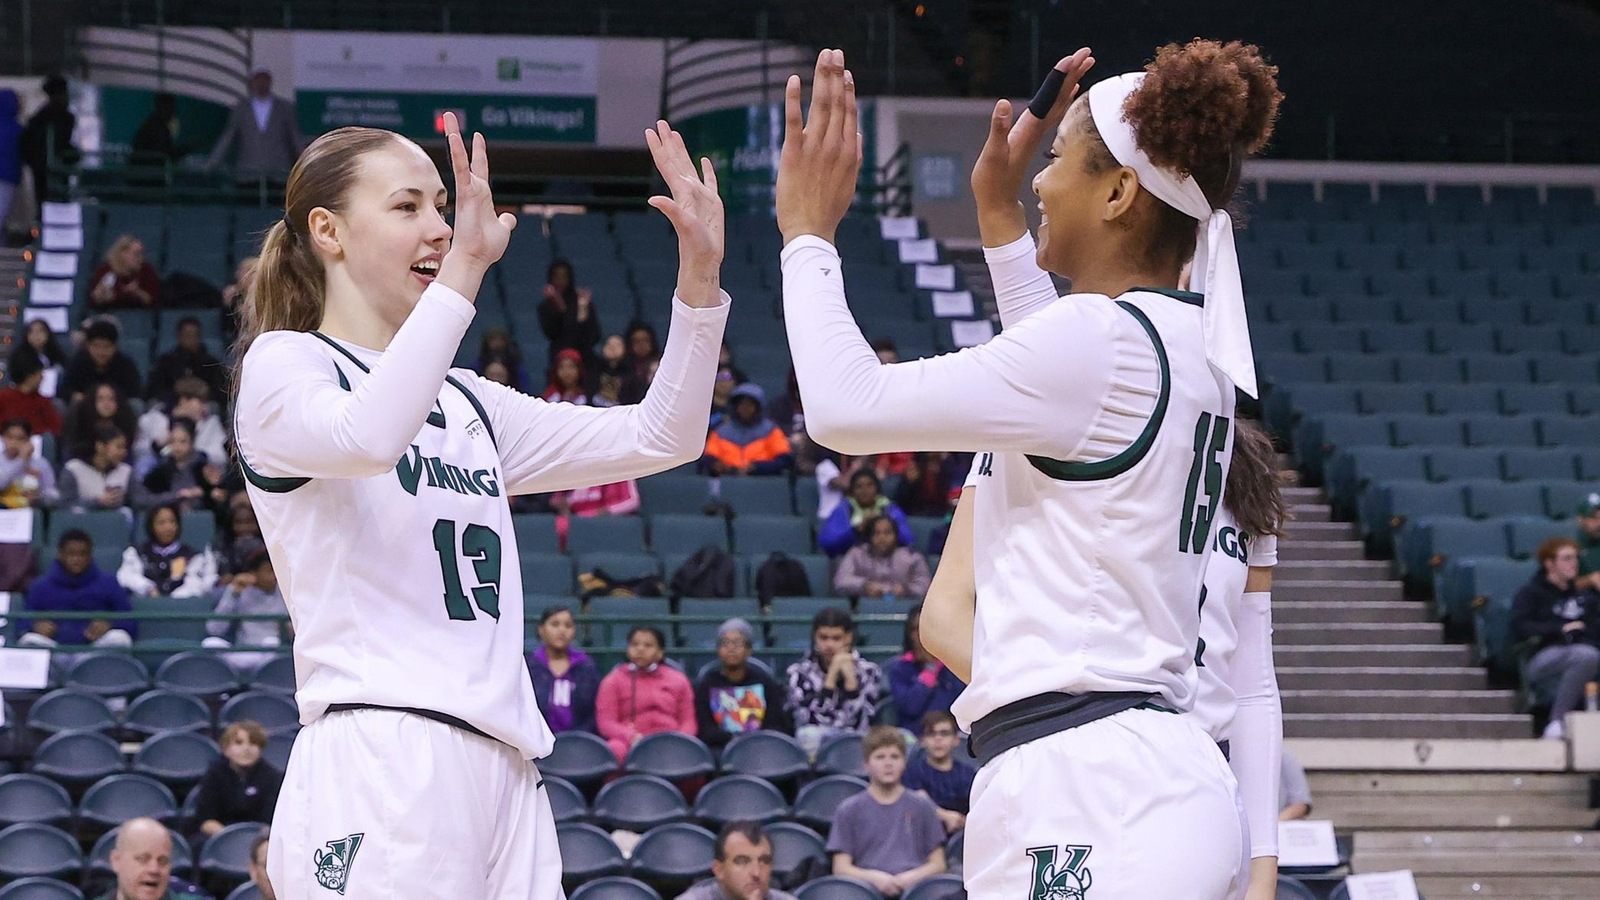 Cleveland State Women’s Basketball Notches 20th Win With 61-43 Victory Over RMU